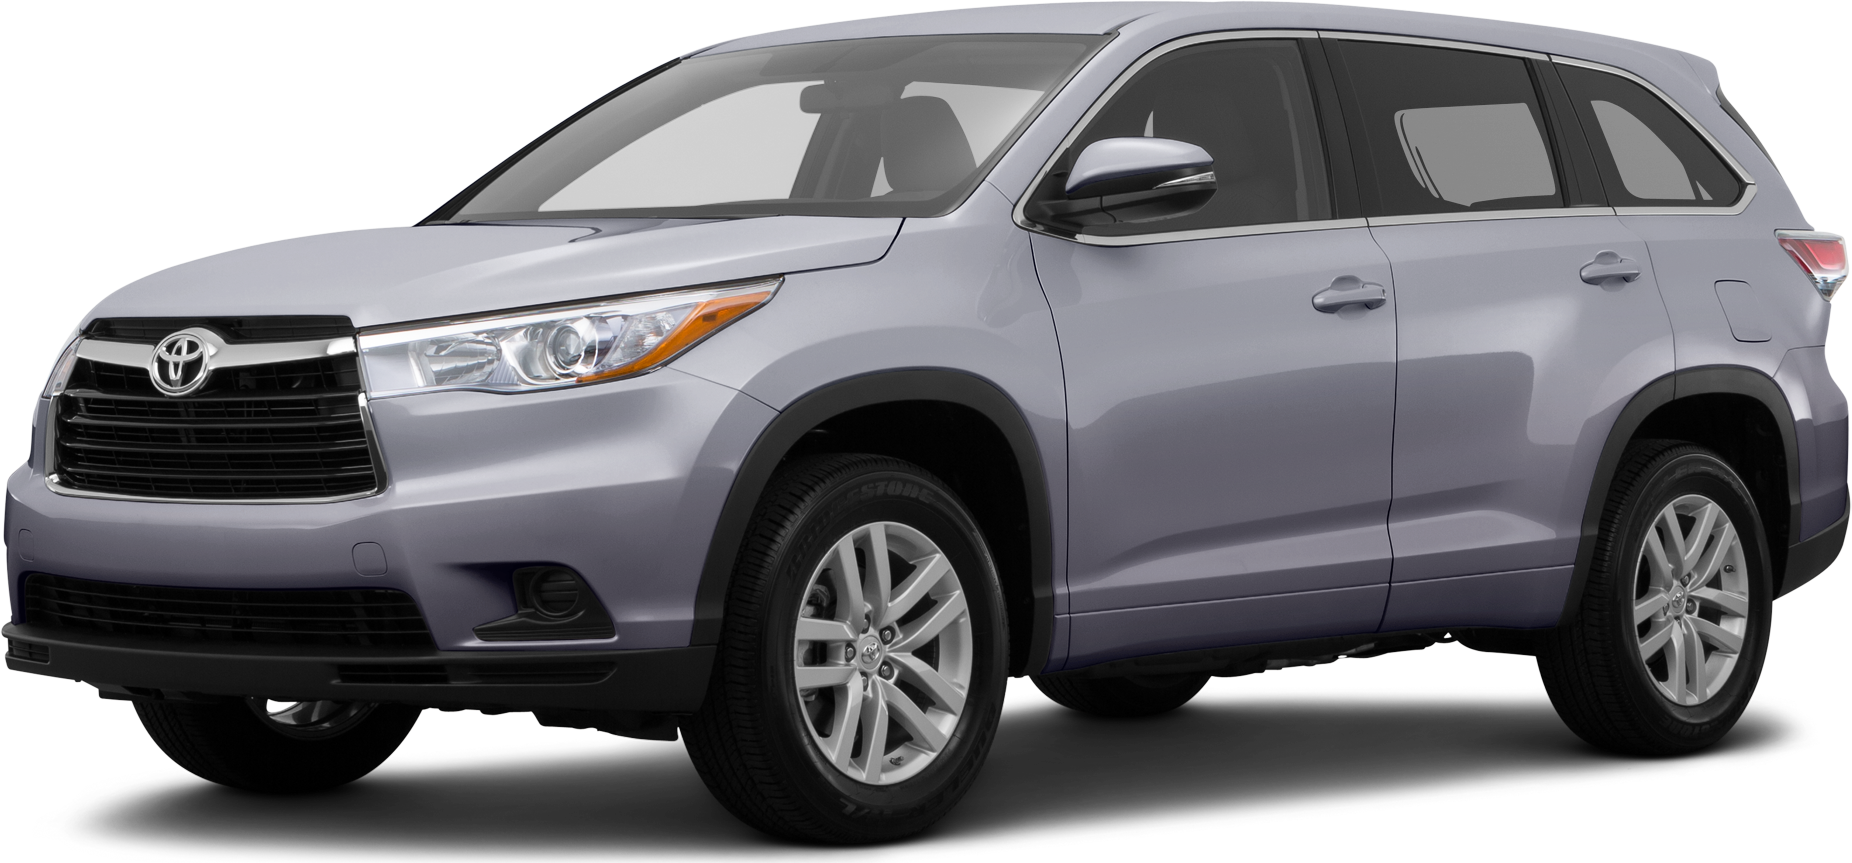 2015 Toyota Highlander Prices, Reviews, and Photos - MotorTrend